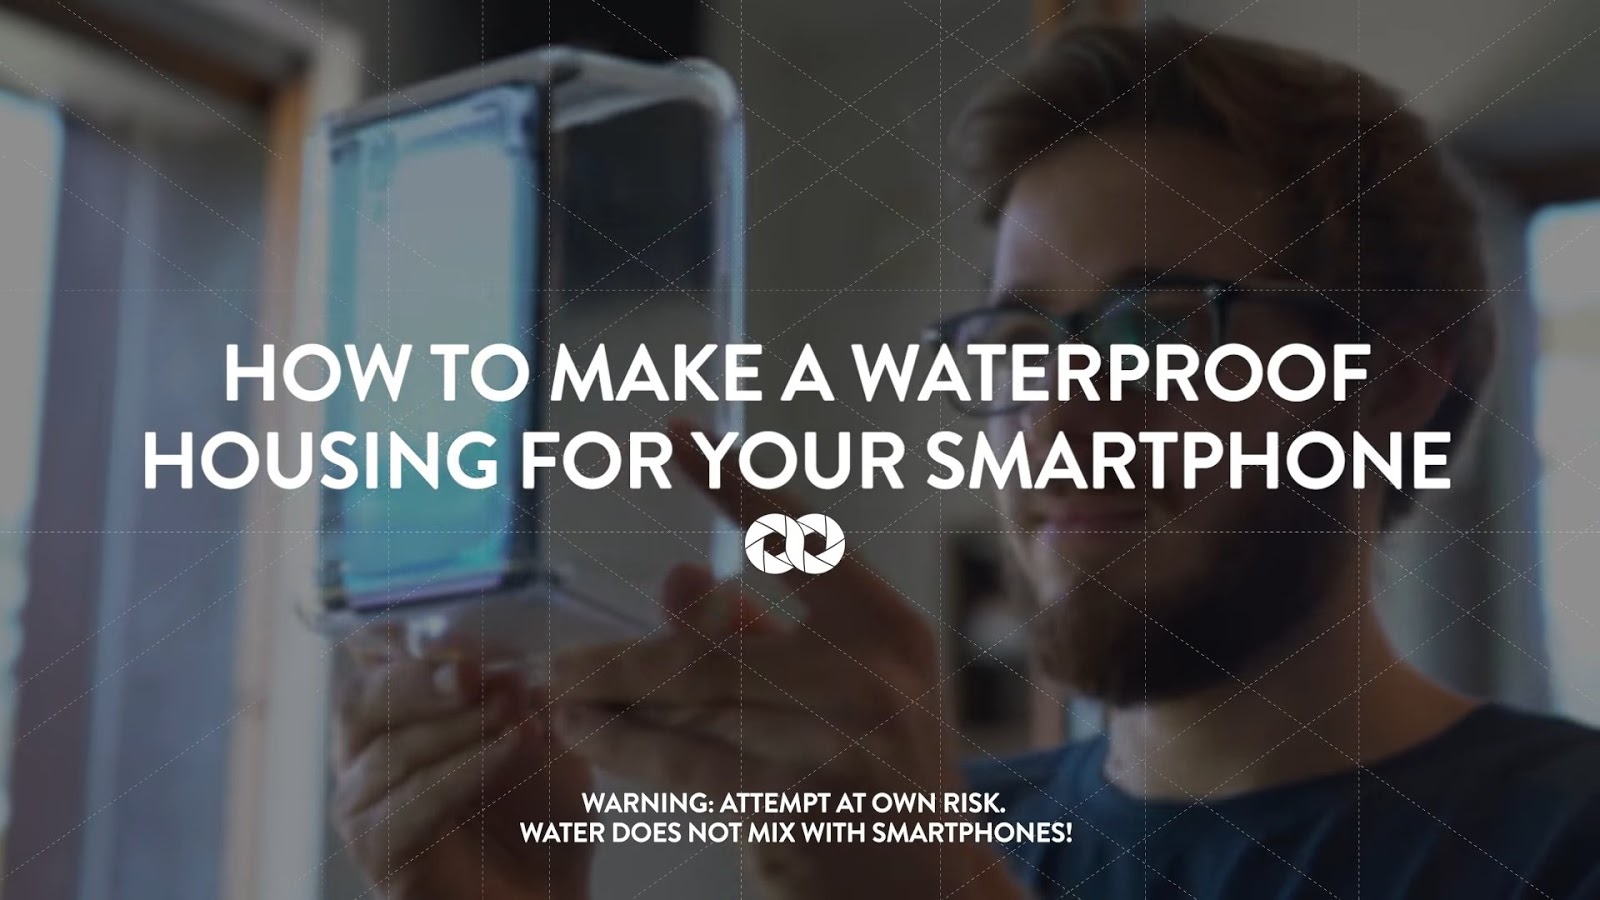 How To Make A Waterproof Housing For Your Smartphone